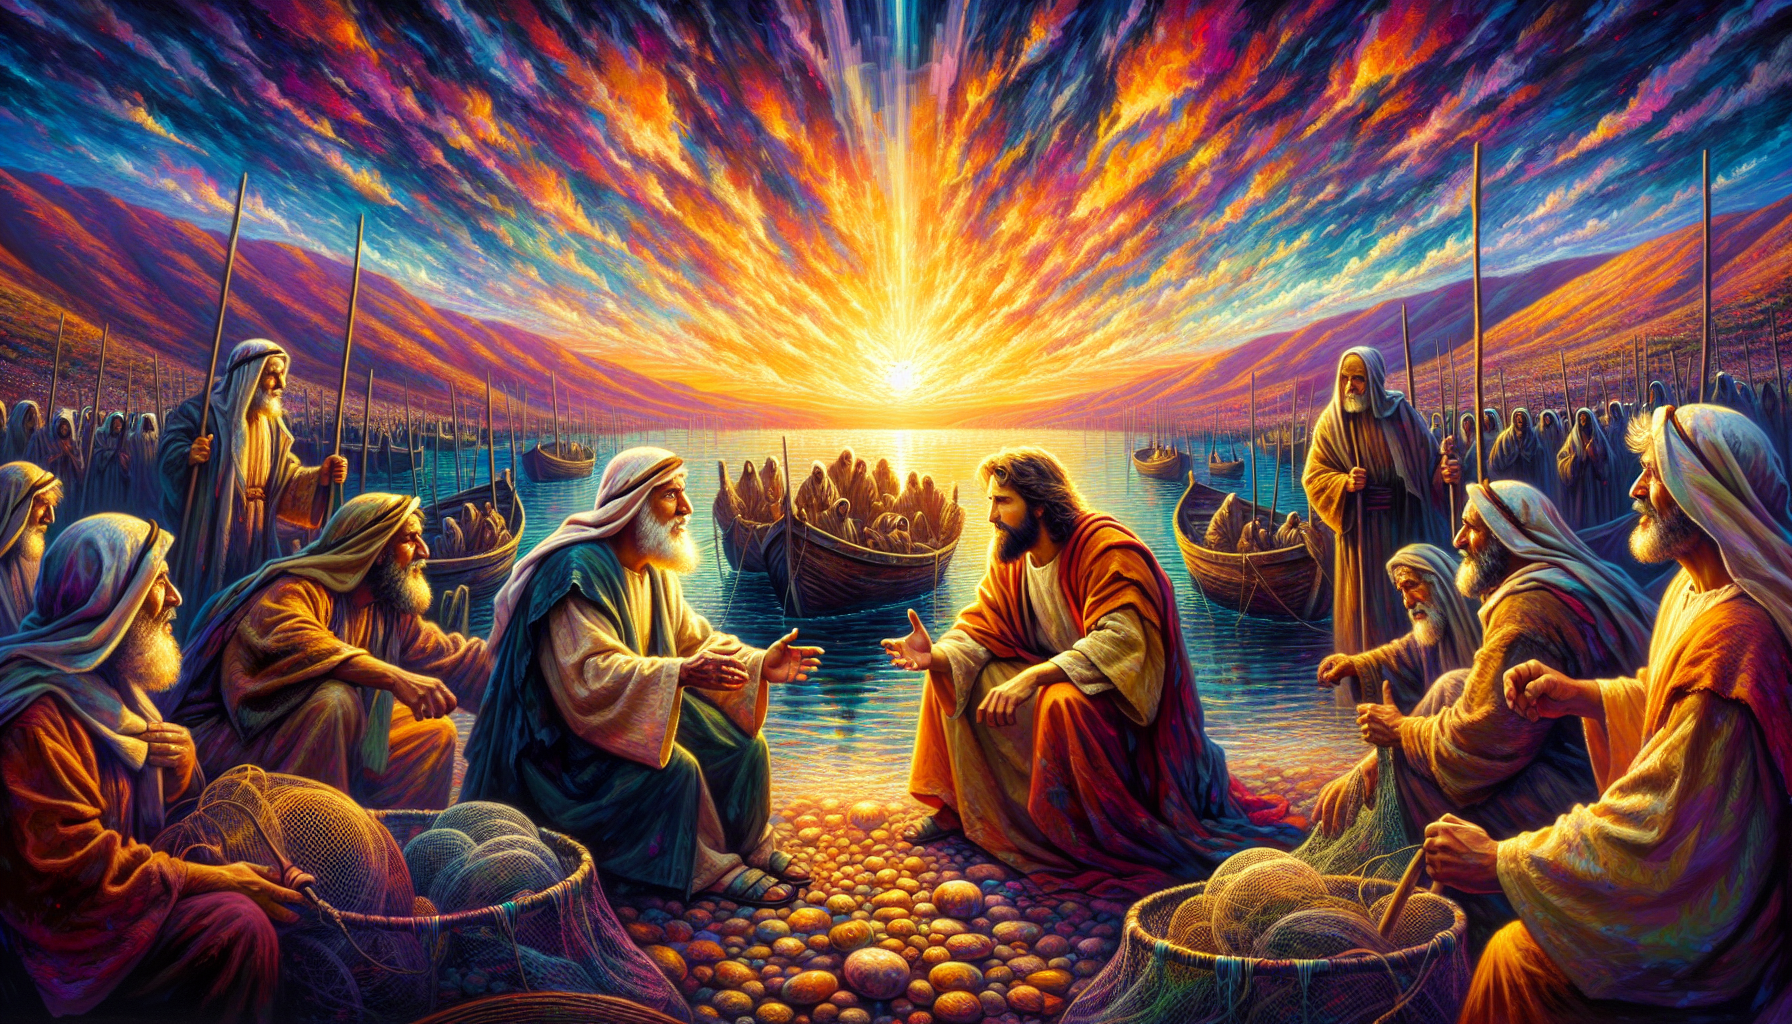 Vibrant painting depicting the biblical scene where Simón and Andrés first meet Jesus by the Sea of Galilee, filled with rich colors and emotional expressions, showcasing the moment of their decision